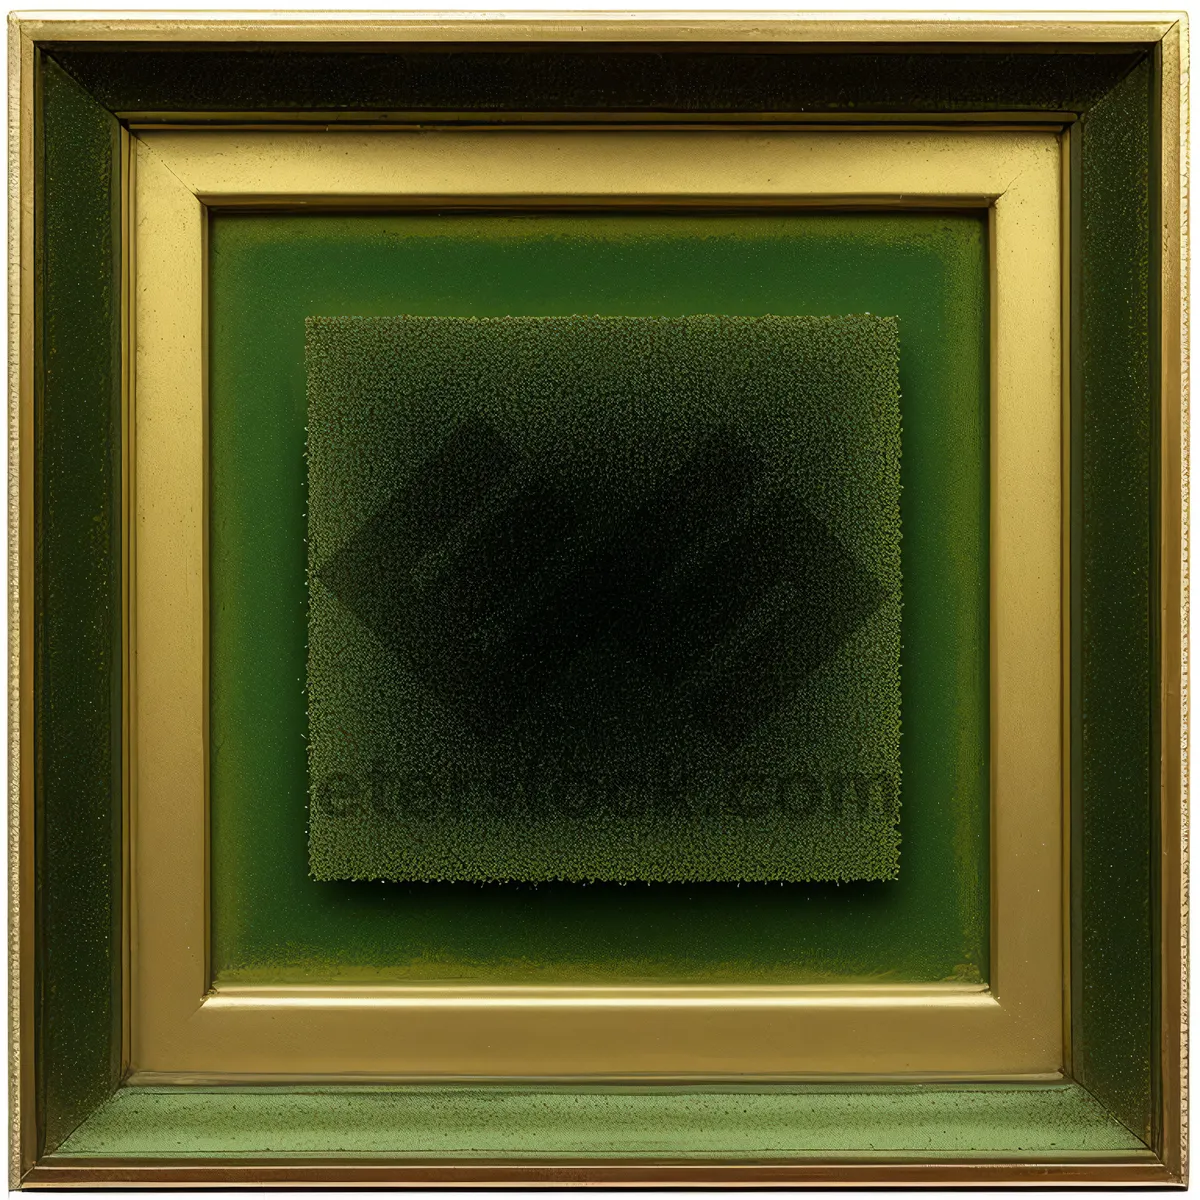 Picture of Vintage Wooden Frame with Grunge Texture